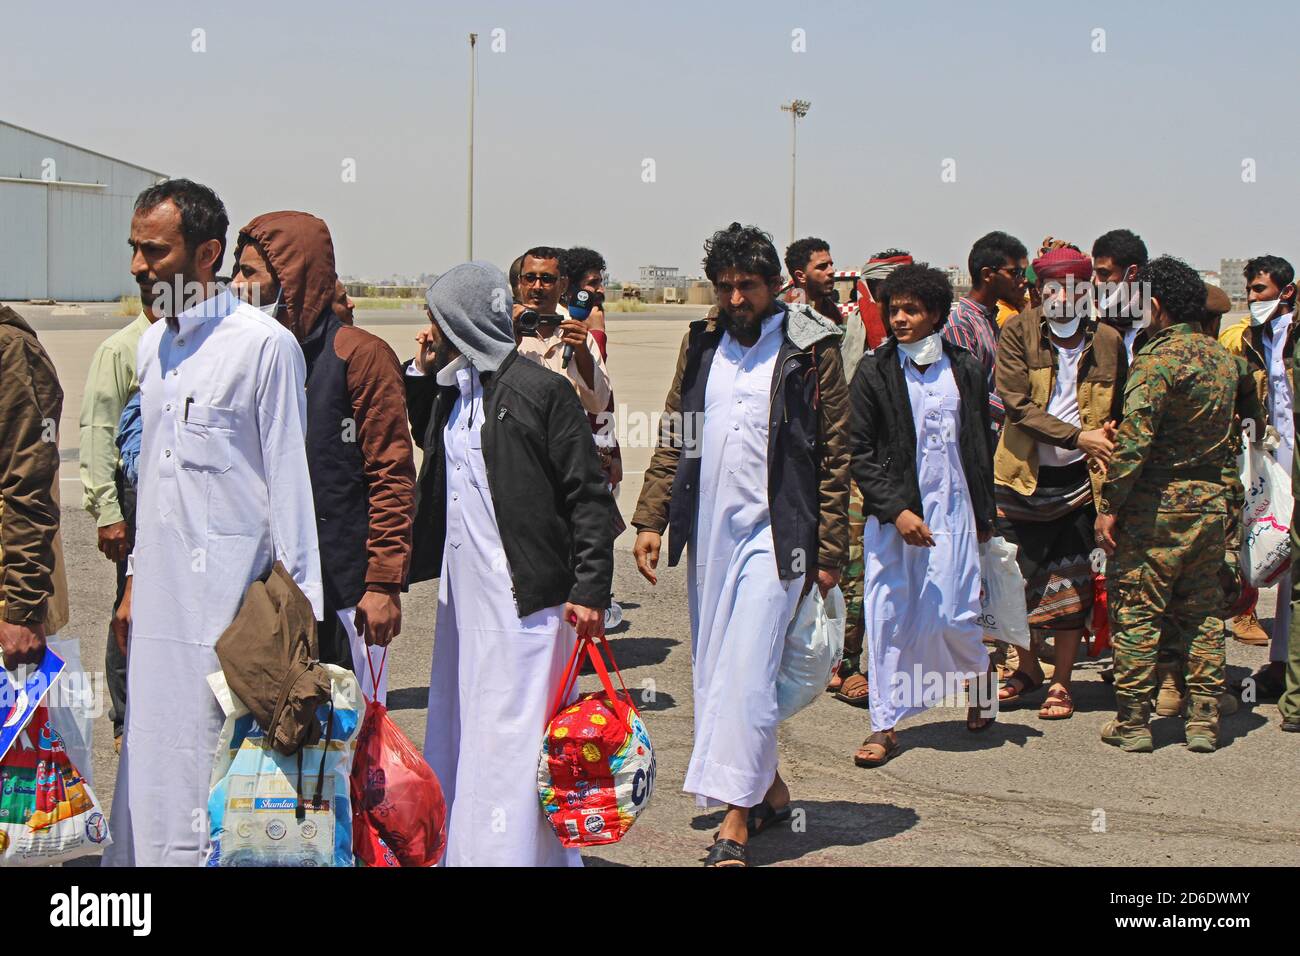 Aden, Yemen. 16th Oct, 2020. Yemeni prisoners, who were held by Houthi, arrive at an airport in the southern city of Aden, after being released on the second day of a prisoner swap between the Yemeni government and the Houthi movement. More than 1,000 people detained in relation to the conflict in Yemen are to be transported back to their region of origin or to their home countries by The International Committee of the Red Cross (ICRC) in the largest operation of its kind during the five-and-a-half-year war. Credit: Wail Shaif/dpa/Alamy Live News Stock Photo